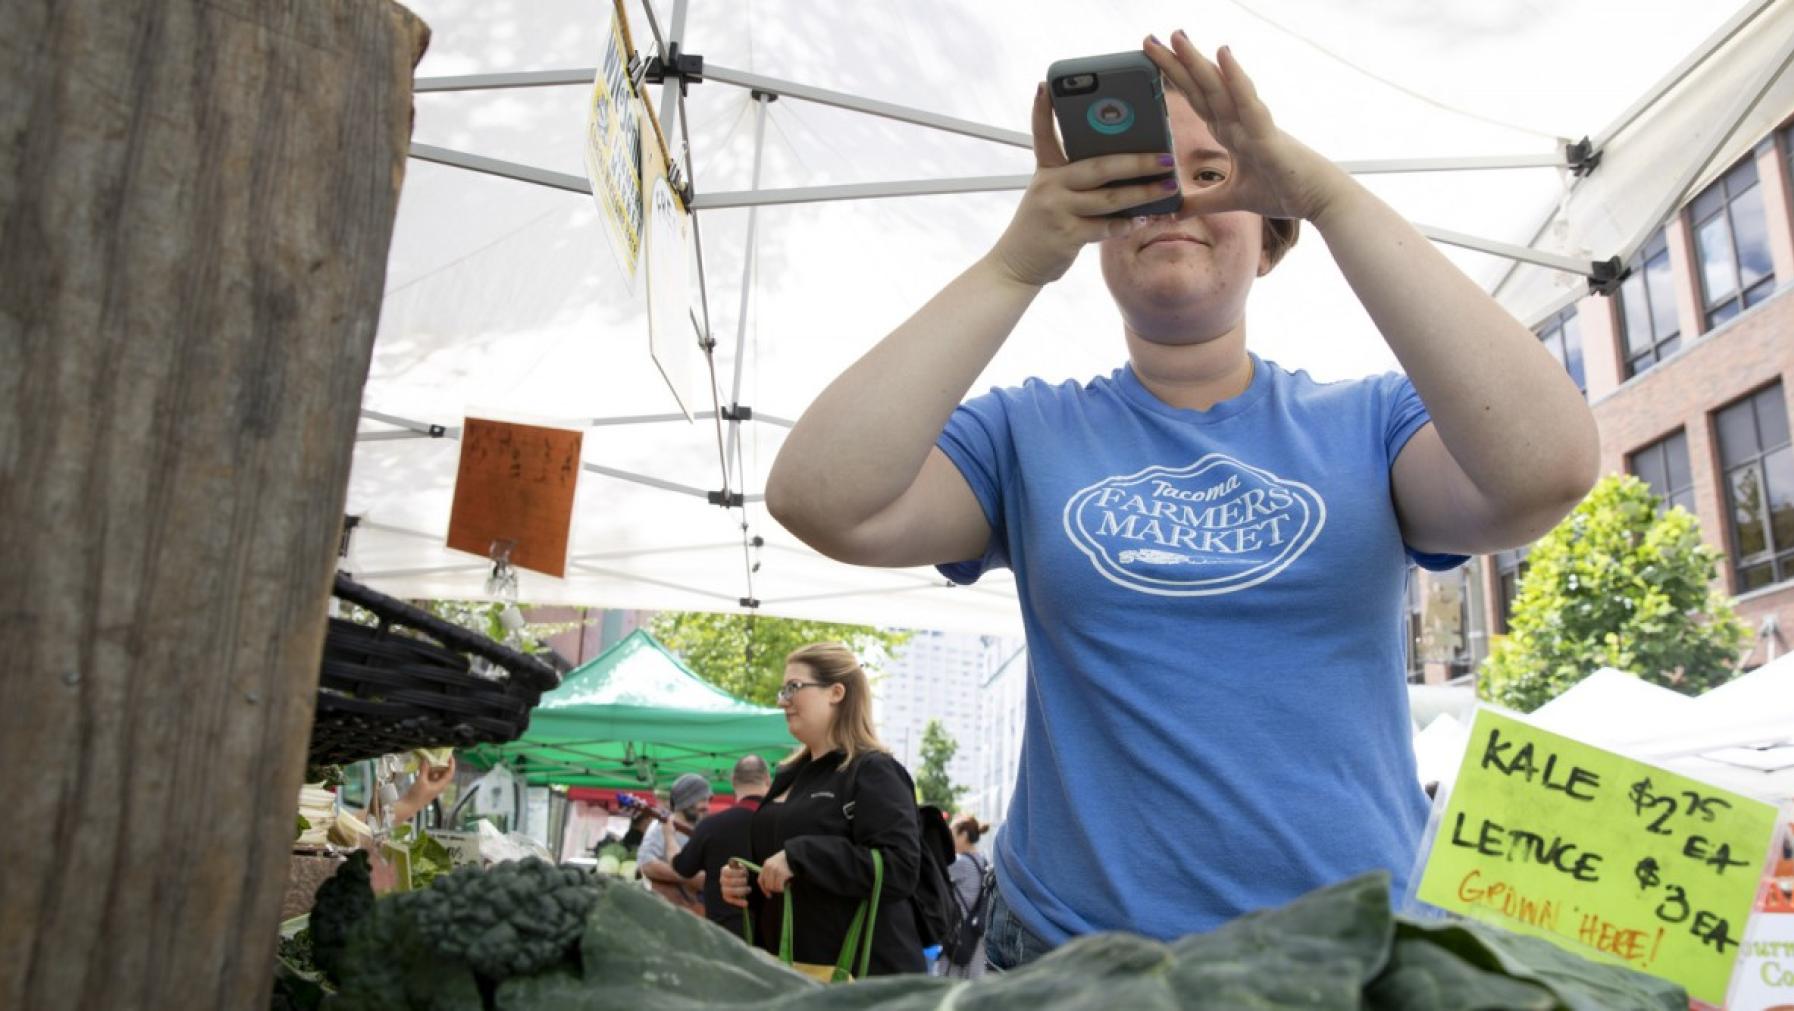 She scopes out the vendor booths at three Tacoma Farmers Market locations—the east side, Broadway, and Point Ruston—every week.